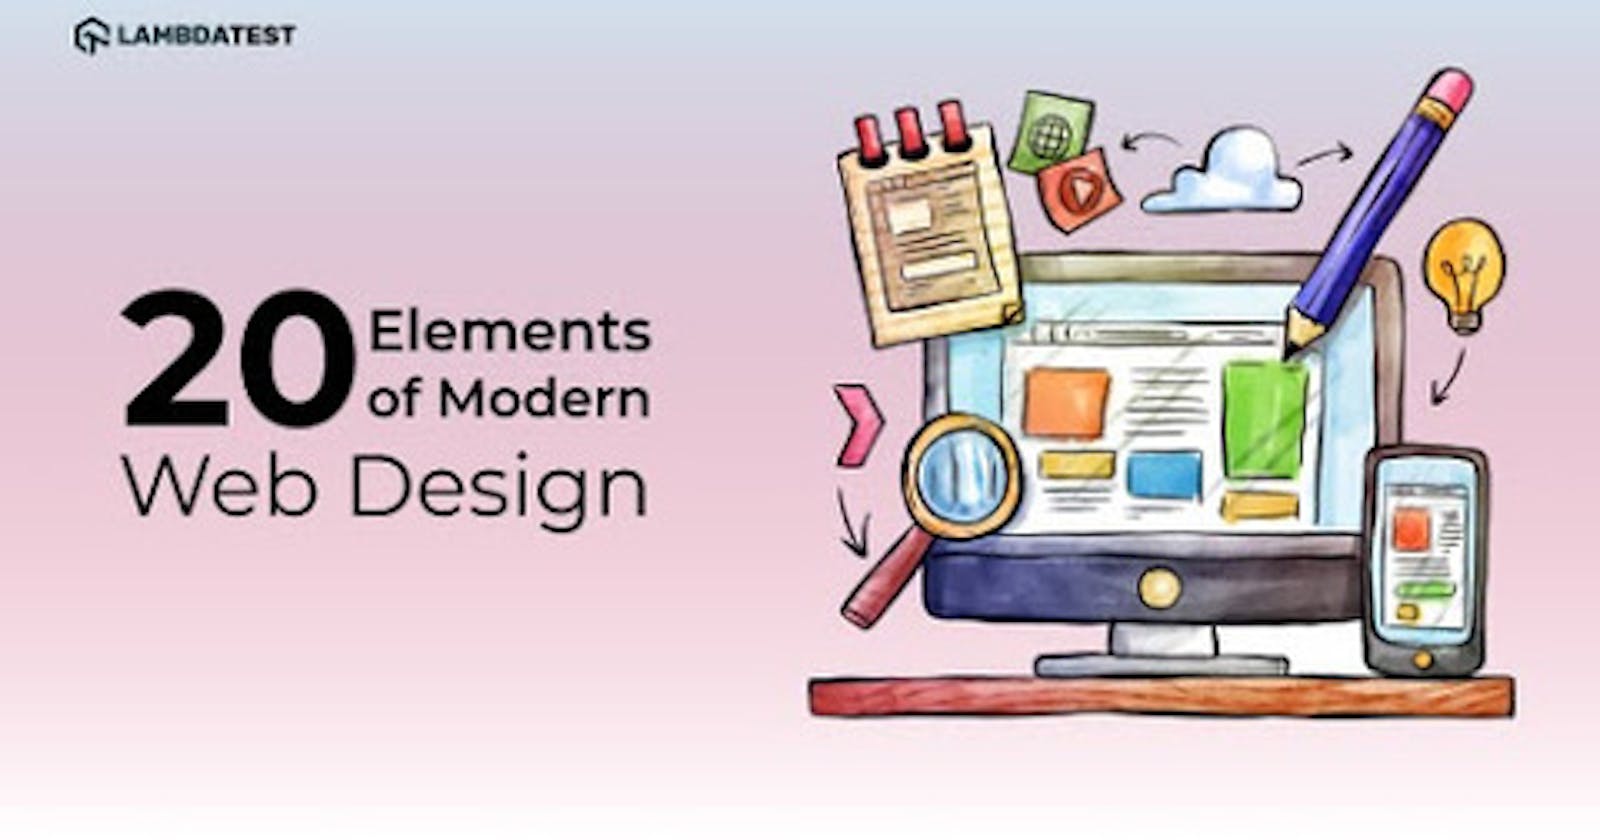 20 Elements of Modern Web Design That You Need to Know